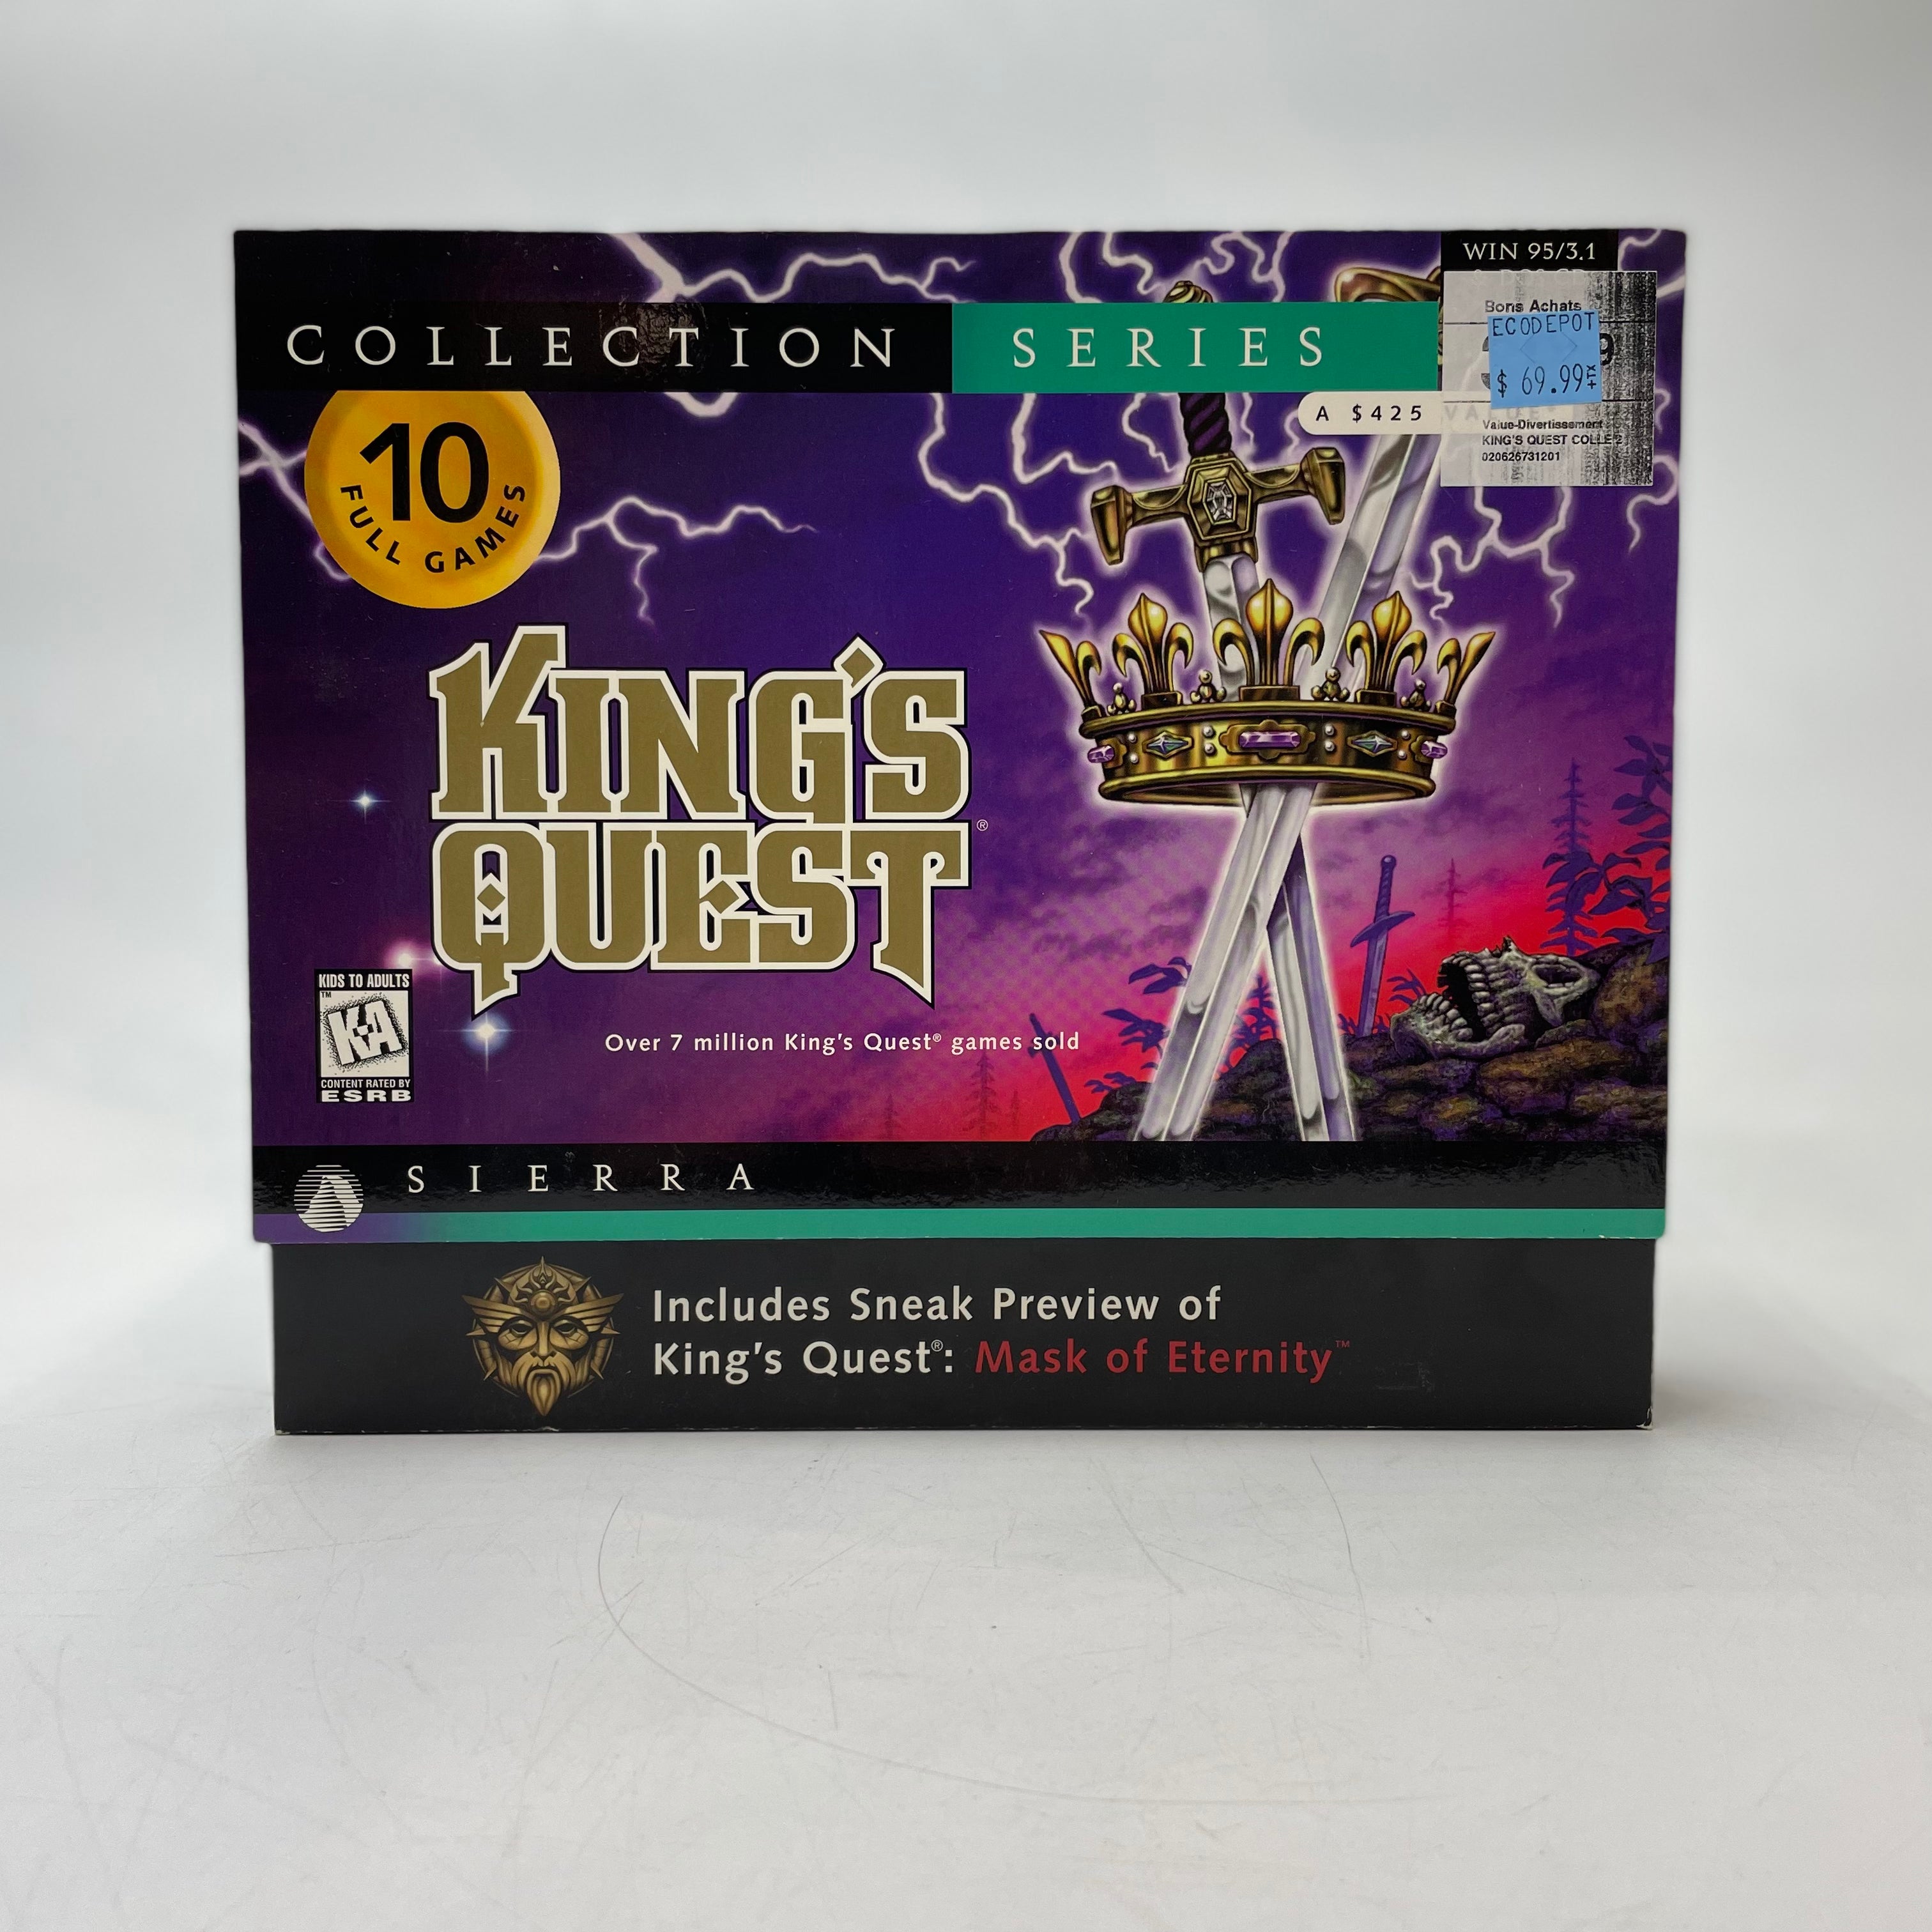 King's Quest: Series Collection (PC, 1999)